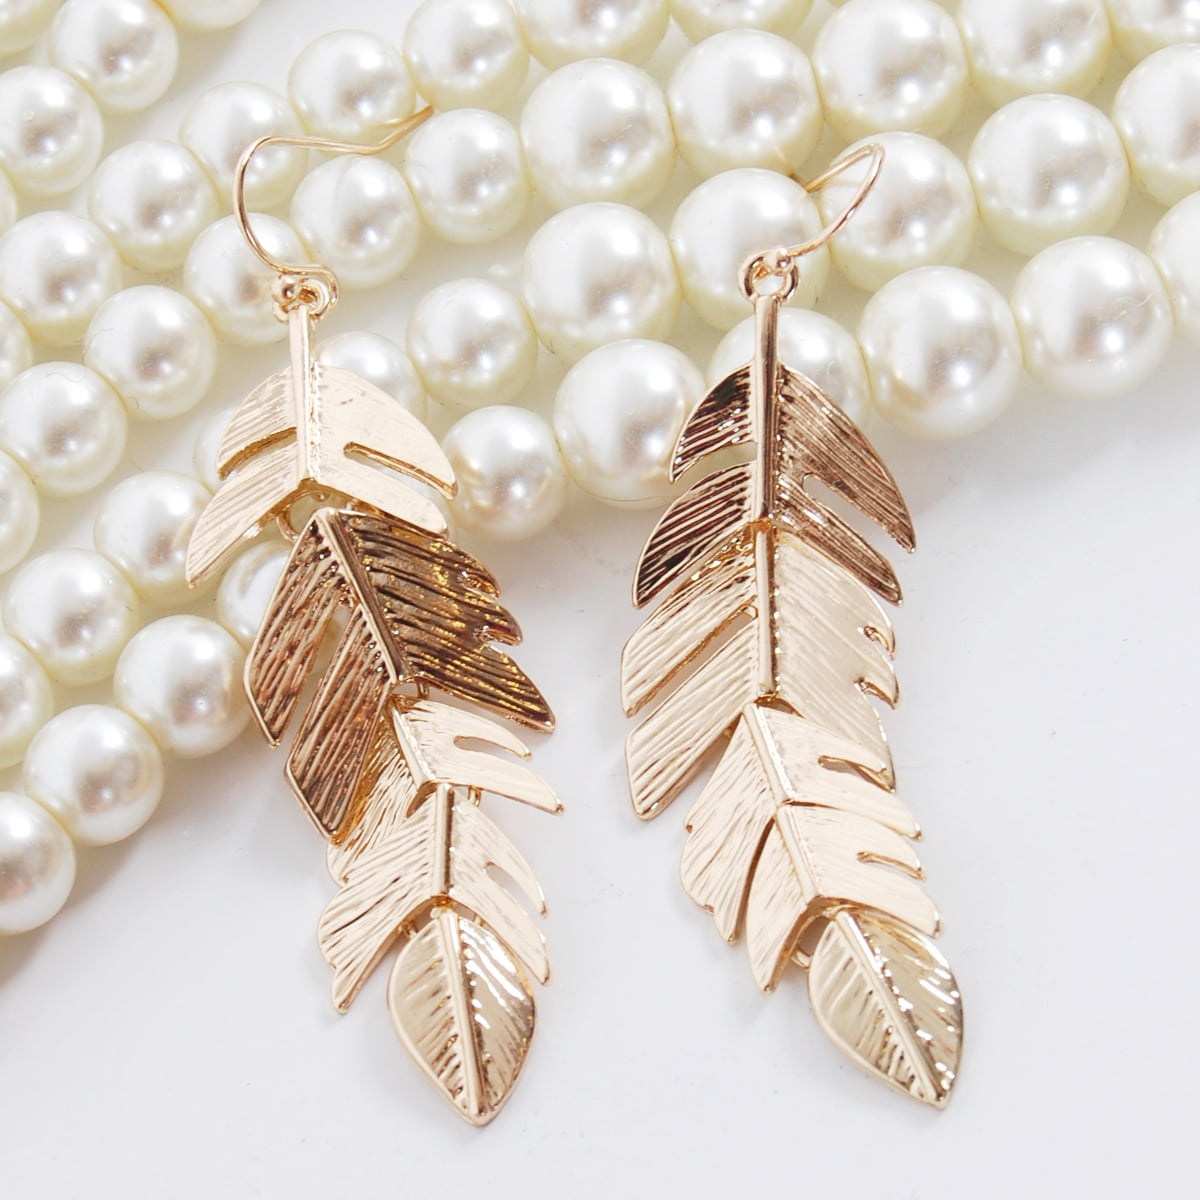 Floating Feathers Dangle Earrings - Long Hanging Metal Link Leaf Drops by  Humble Chic NY, Gold-Tone 